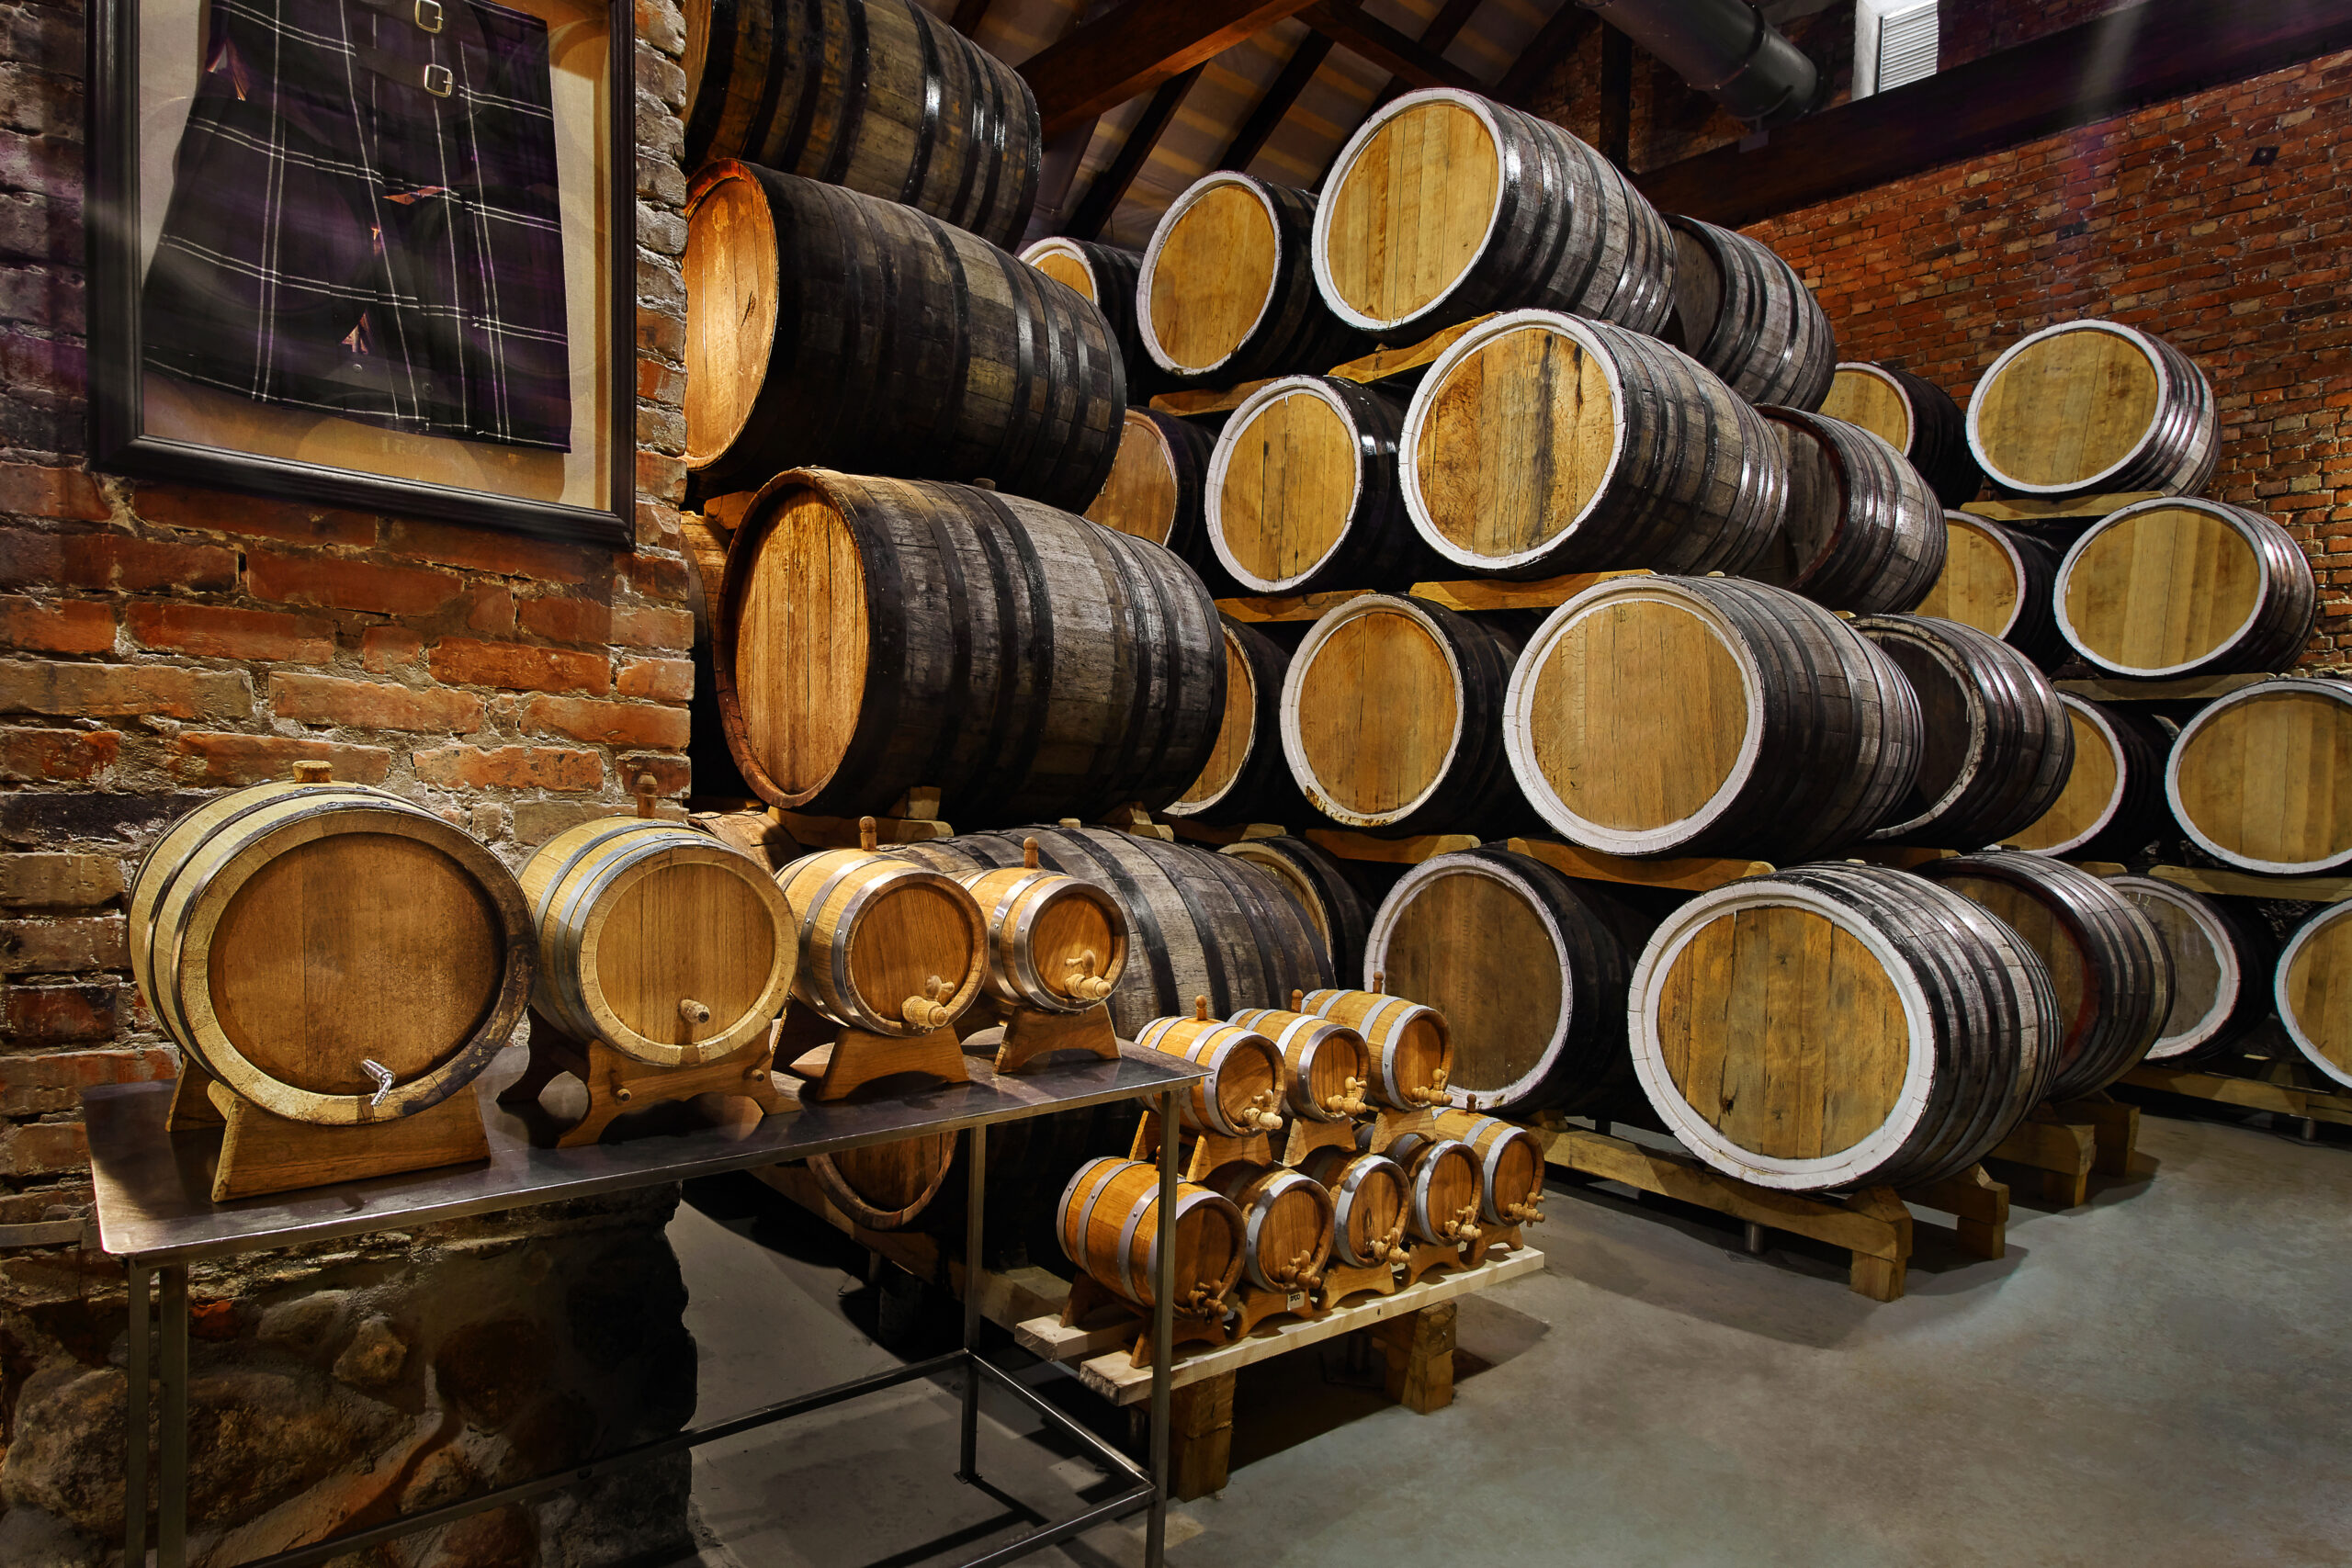 There are different types of whiskey casks according to size and 